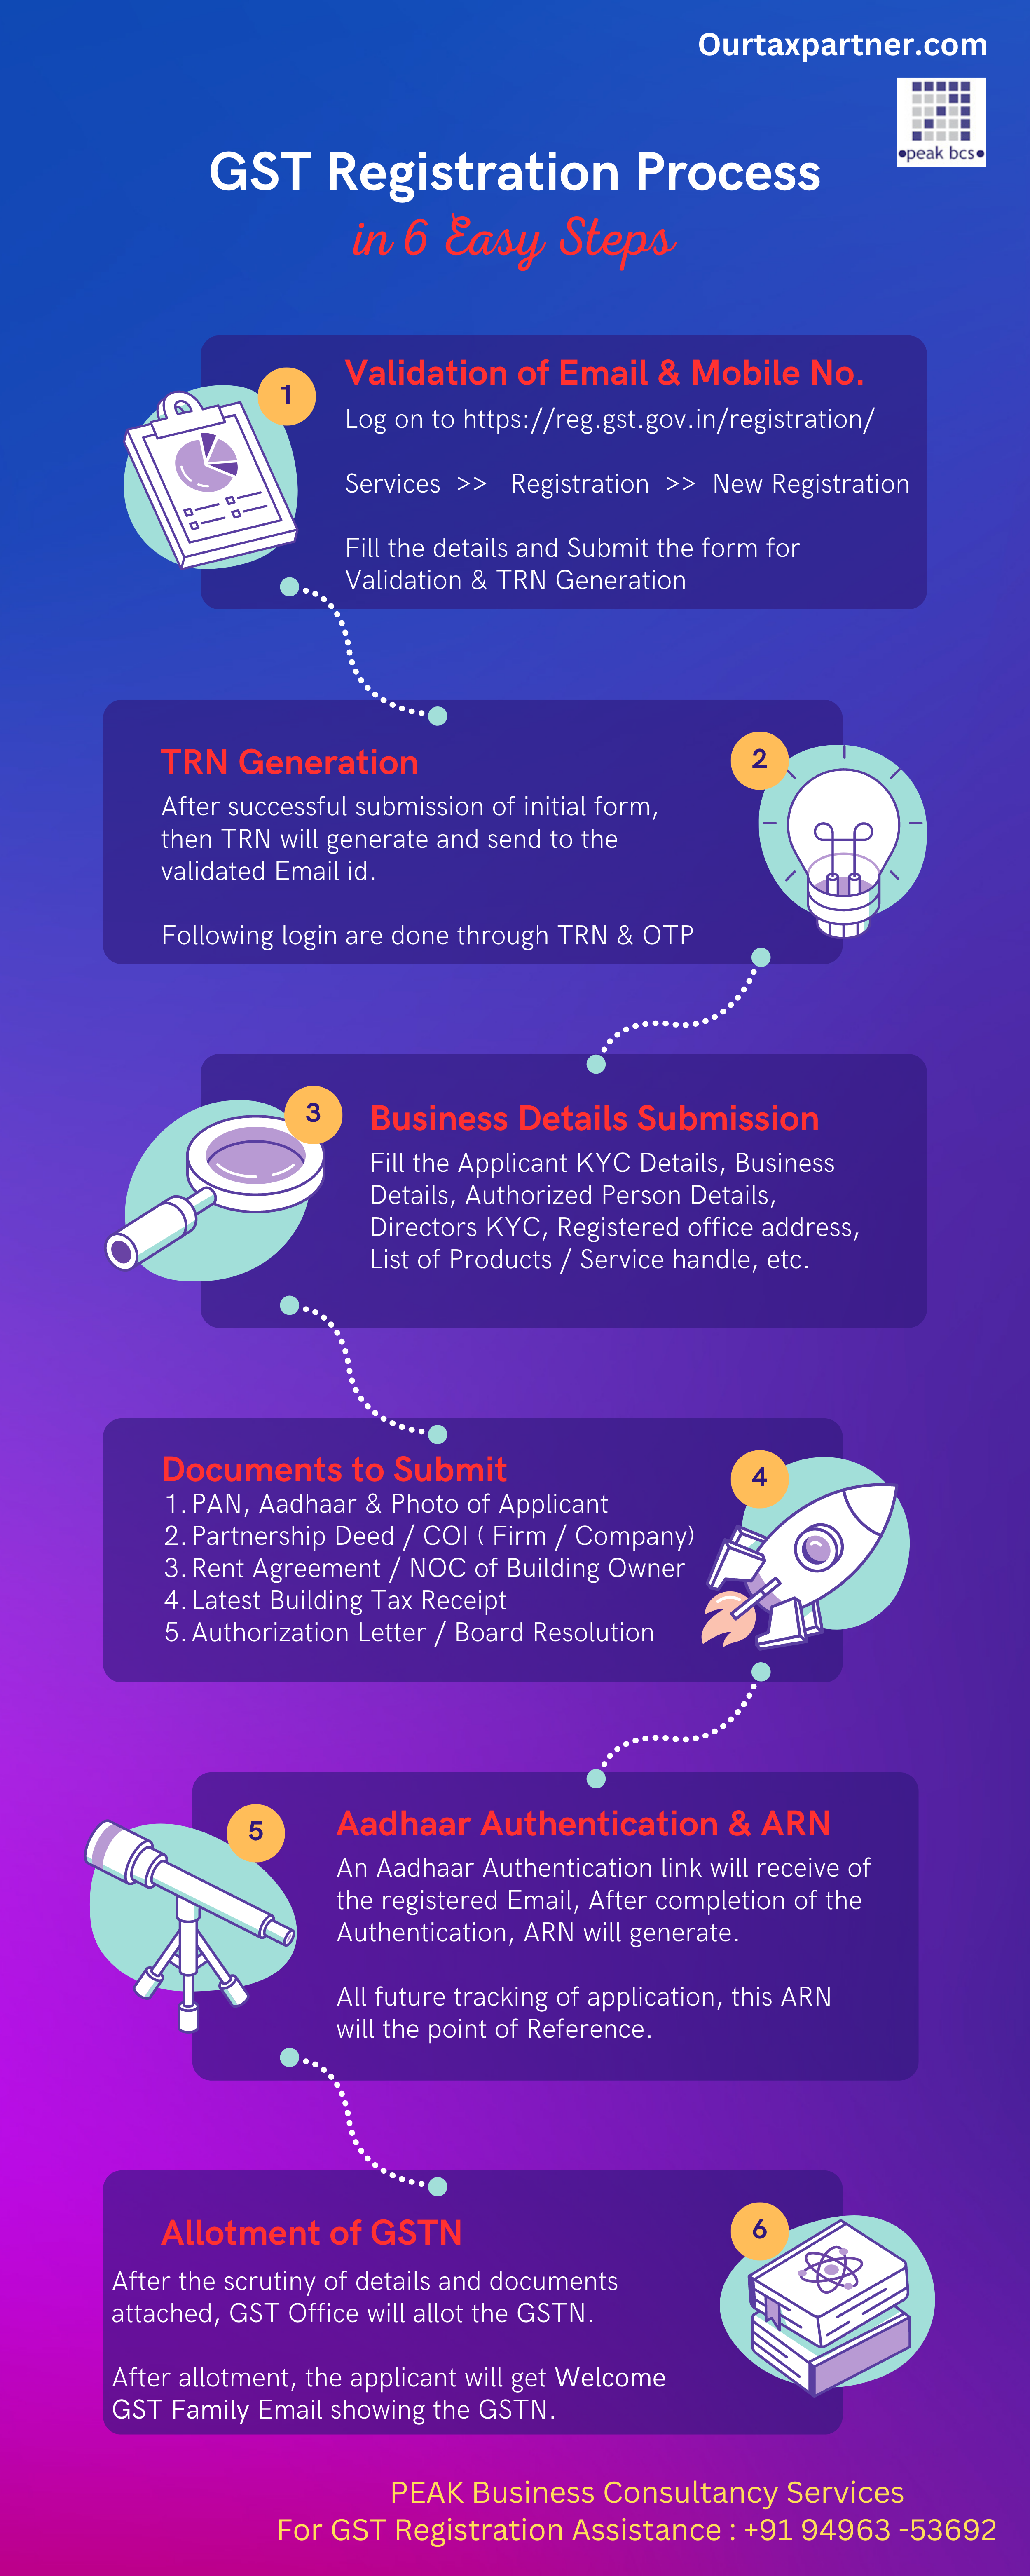  Steps for GST registration process including PAN number, GSTN registration, business details, and application submission with the assistance of a tax professional or a GST consultant. Simplified GST registration process for businesses in India with the assistance of Ourtaxpartner.com., https://www.ourtaxpartner.com/registration-service/gst-registration/